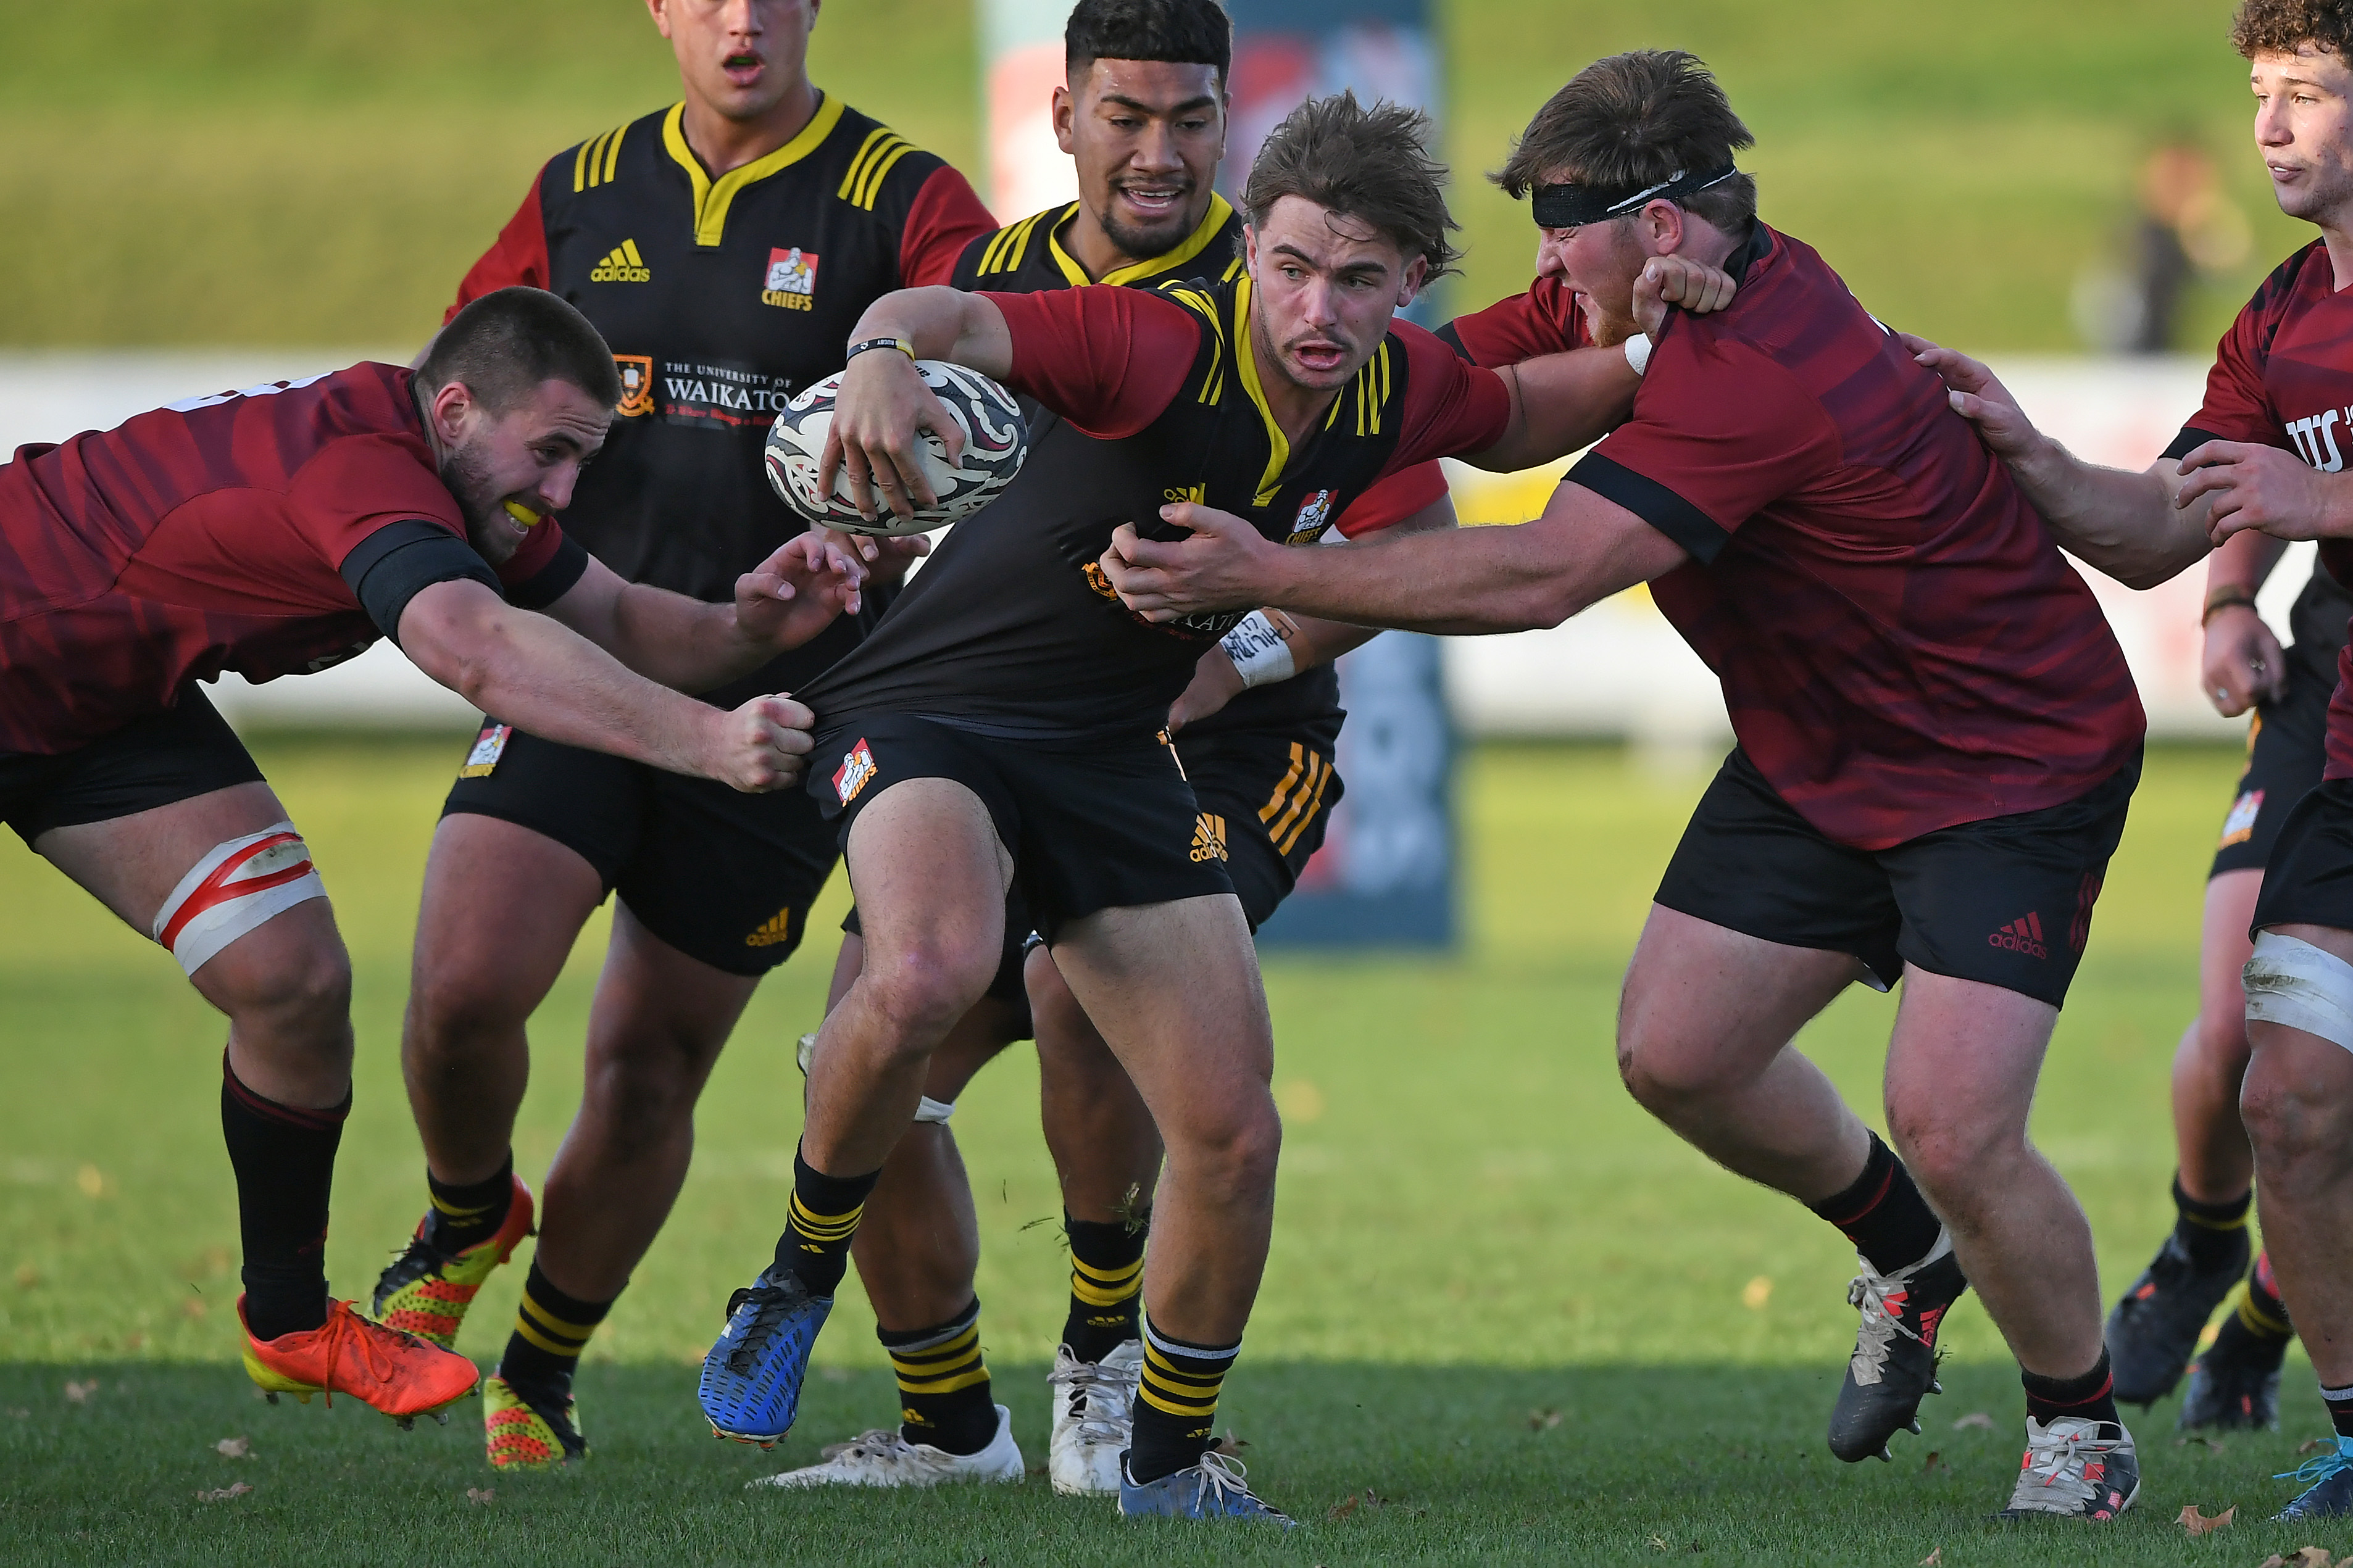 New Zealand Under 19 named to play Stormers Under 19 side